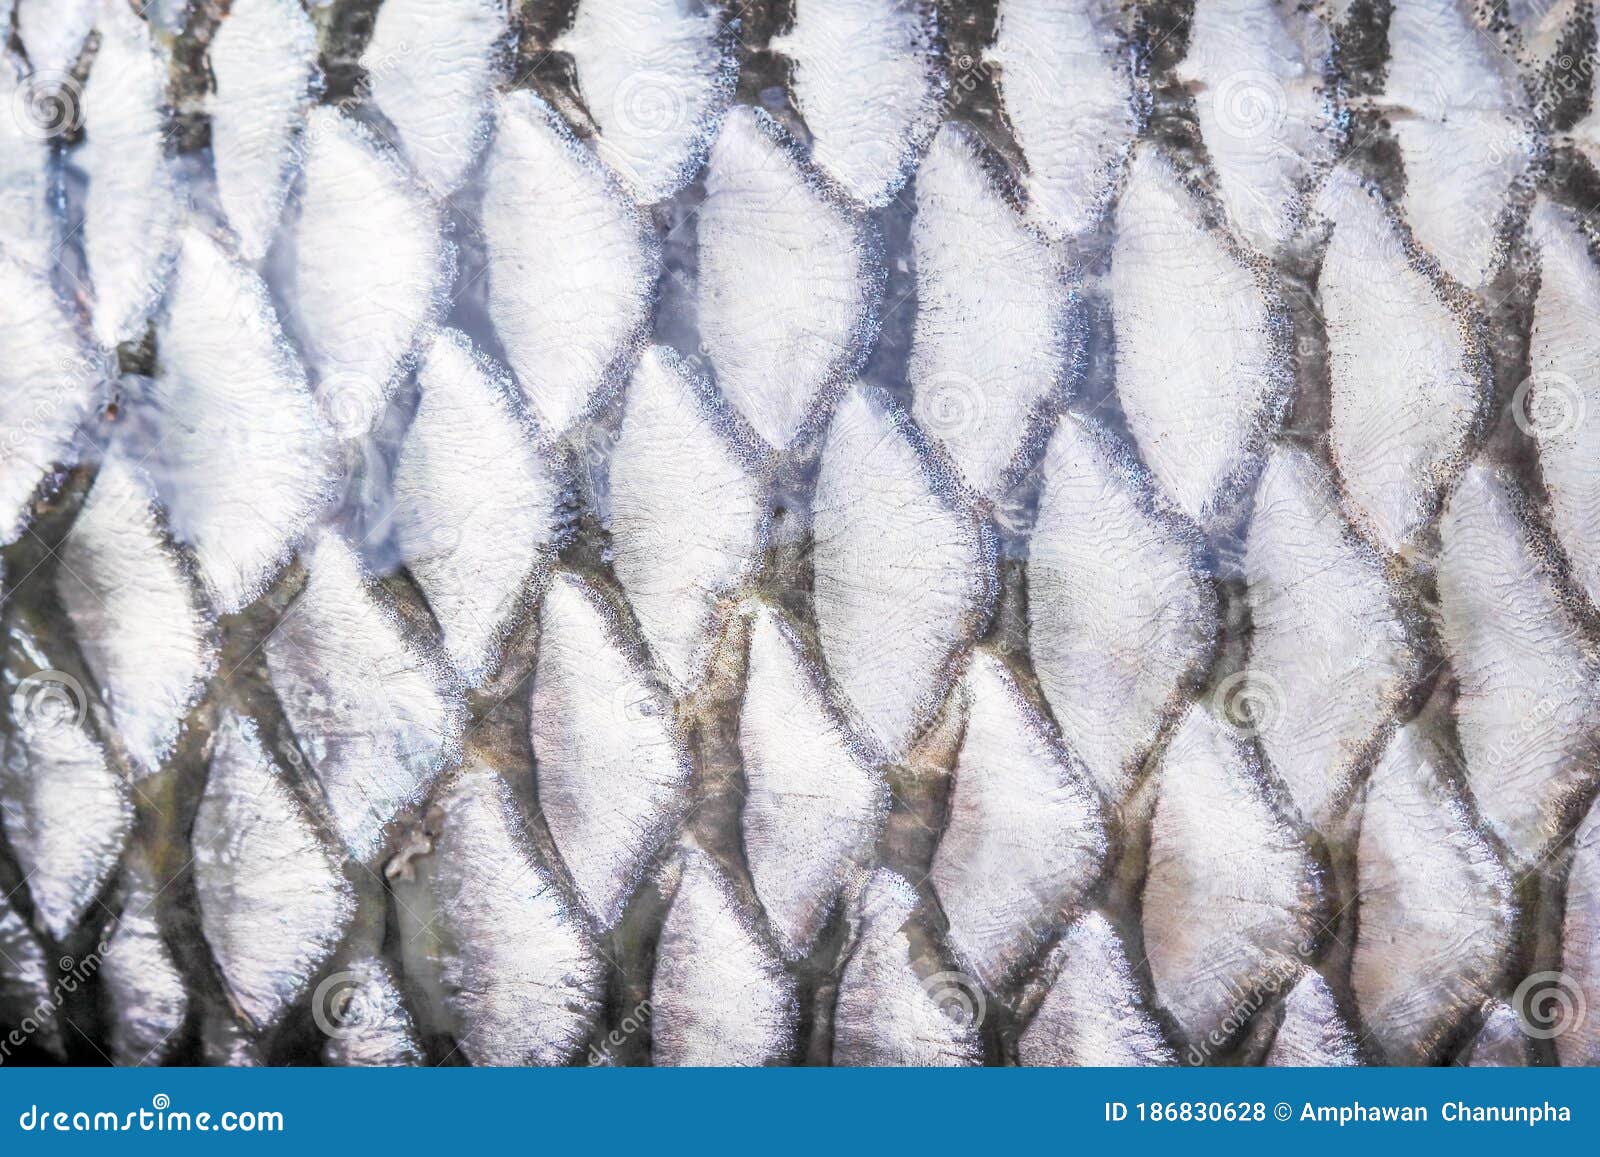 Fish Scale Texture of Common Silver Carb , Nature Animal Skin Patterns  Abstract Background Stock Photo - Image of cyprinidae, aquatic: 186830628